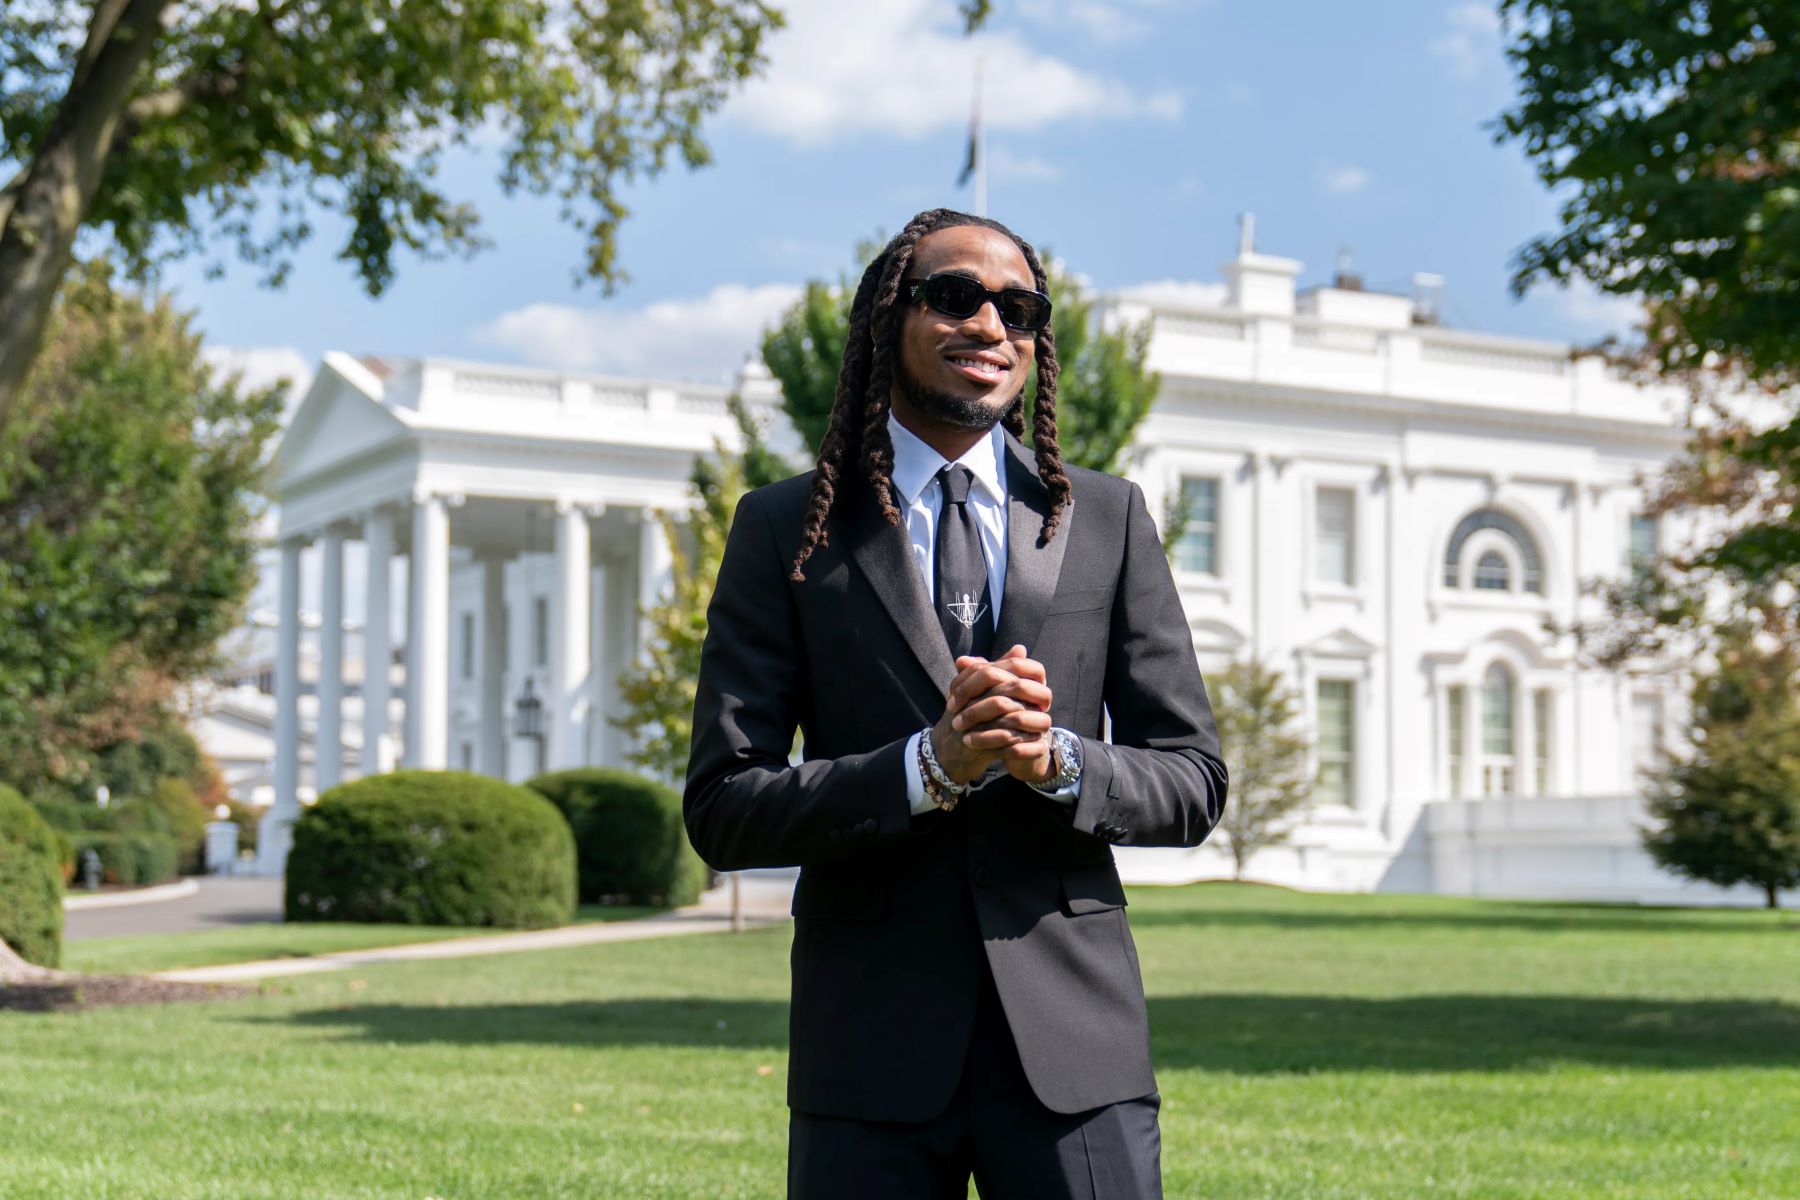 New Developments In Gun Reform: Quavo Meets With VP Kamala Harris At White House